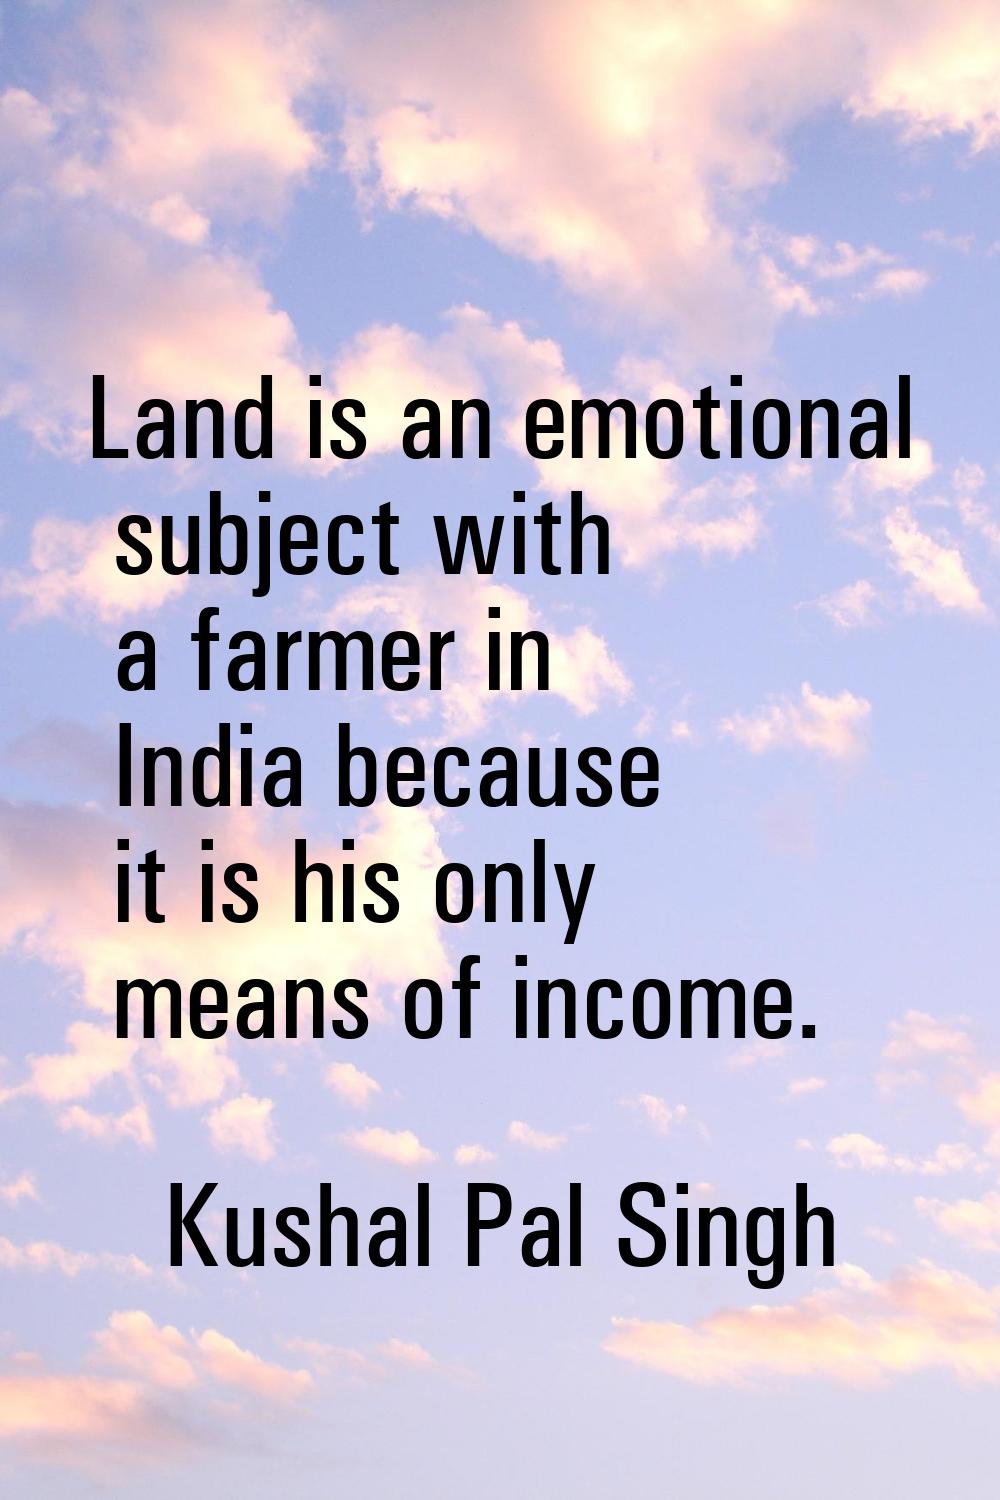 Land is an emotional subject with a farmer in India because it is his only means of income.